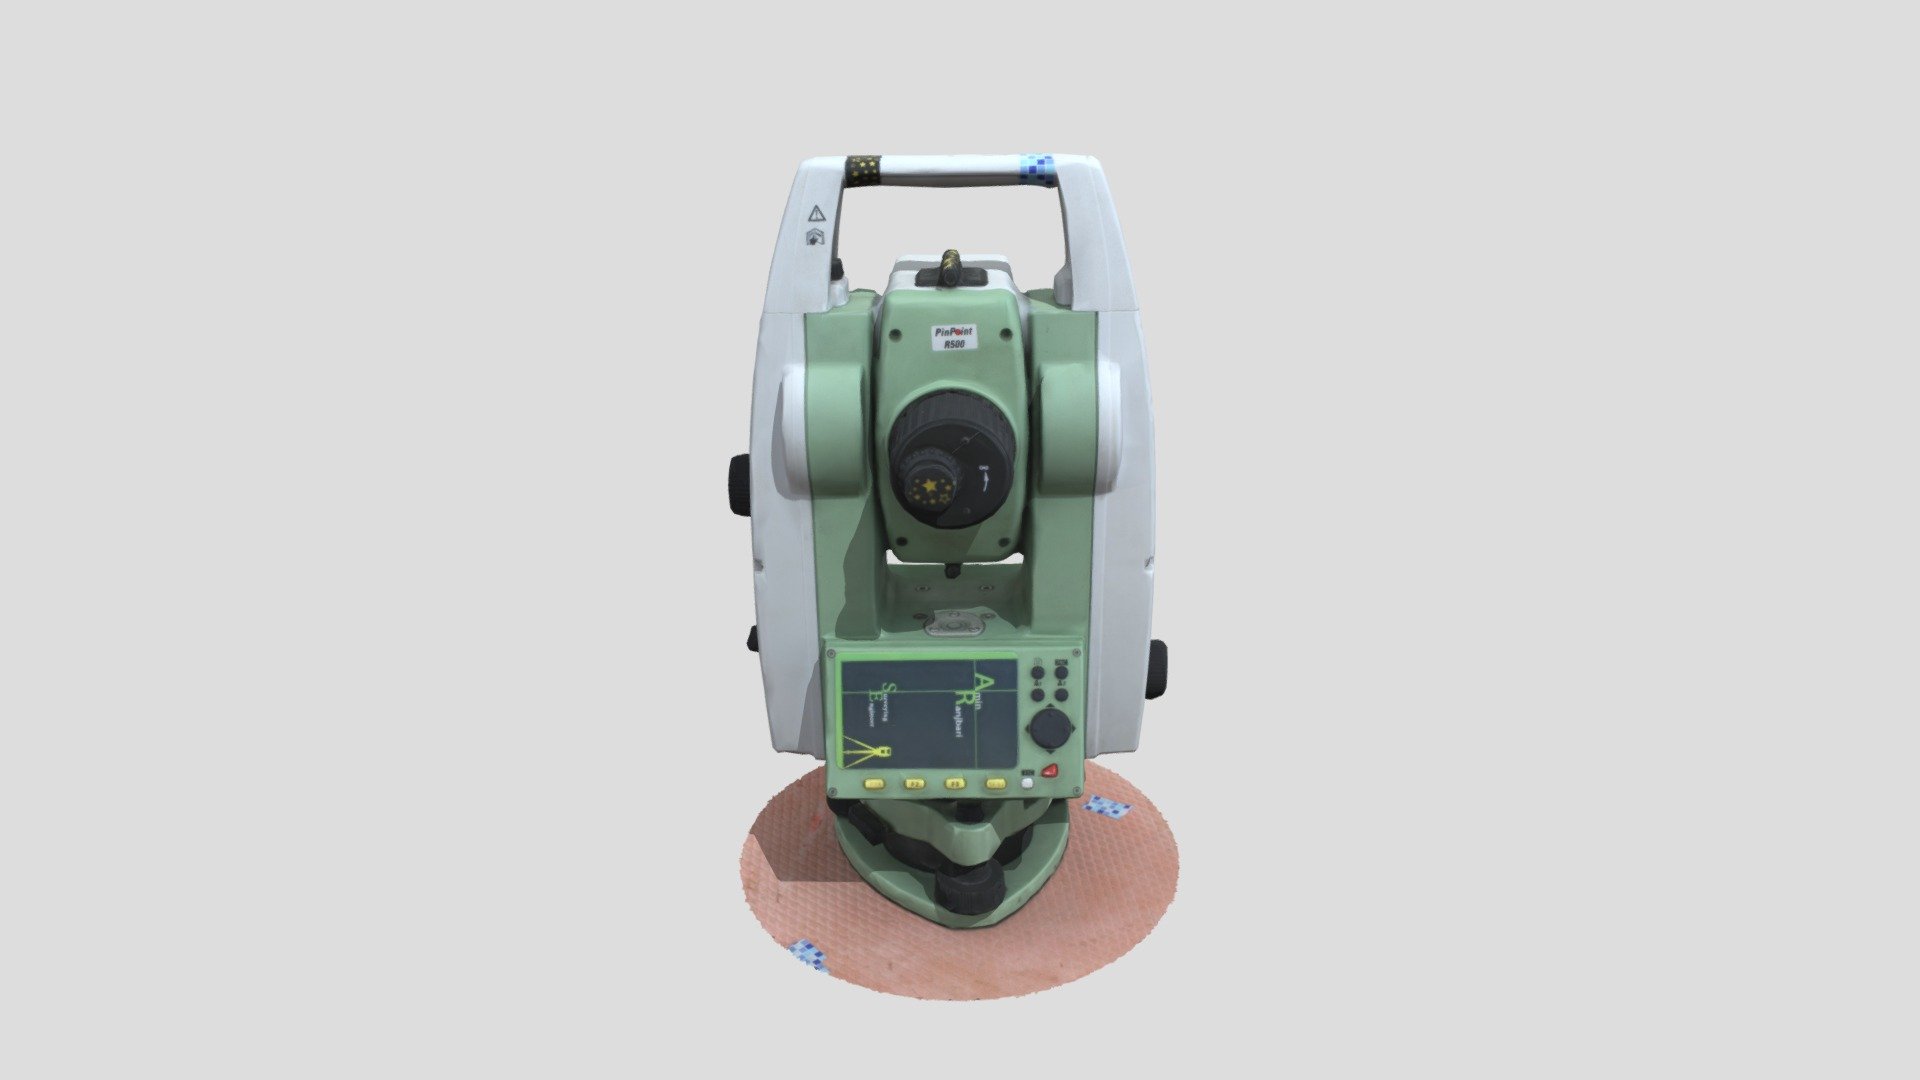 TS02 Leica Total Station